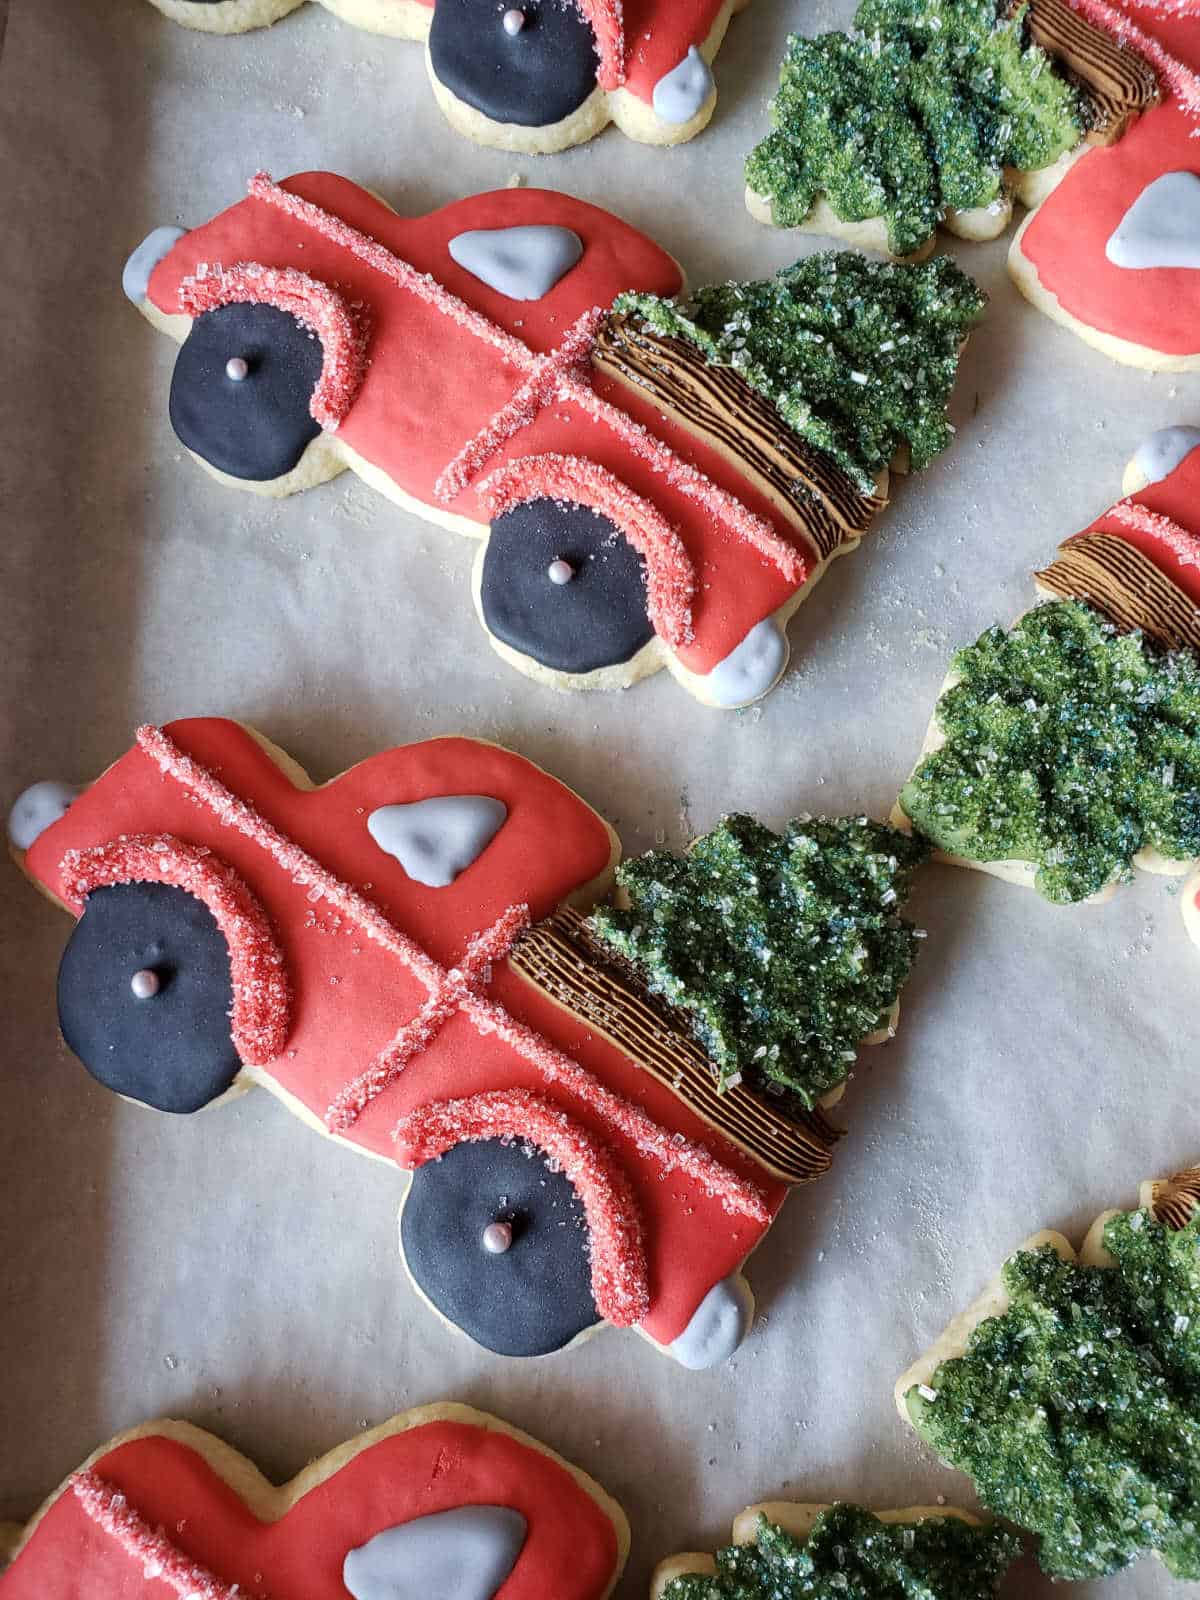 Red truck with Christmas trees sugar cookies drying on baking tray.